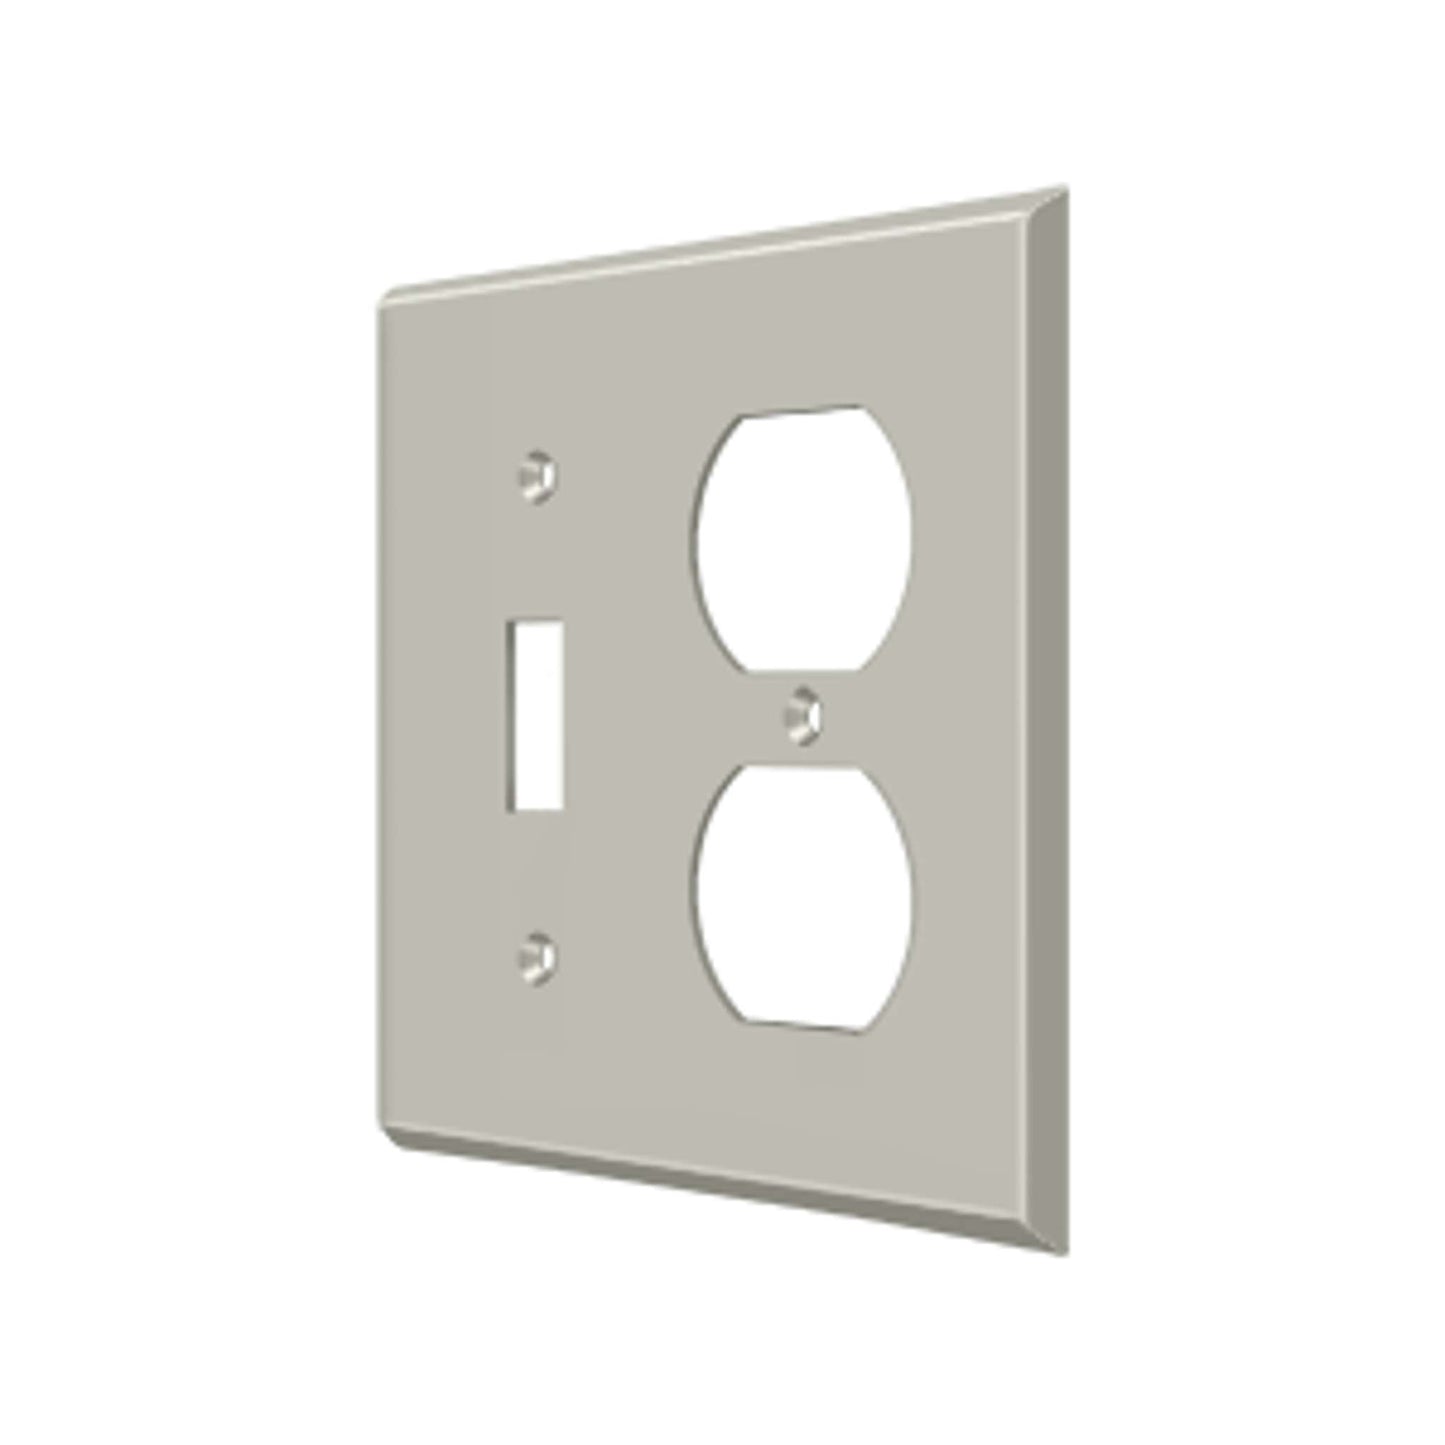 Deltana - Switch Plate, Single Switch/Double Outlet